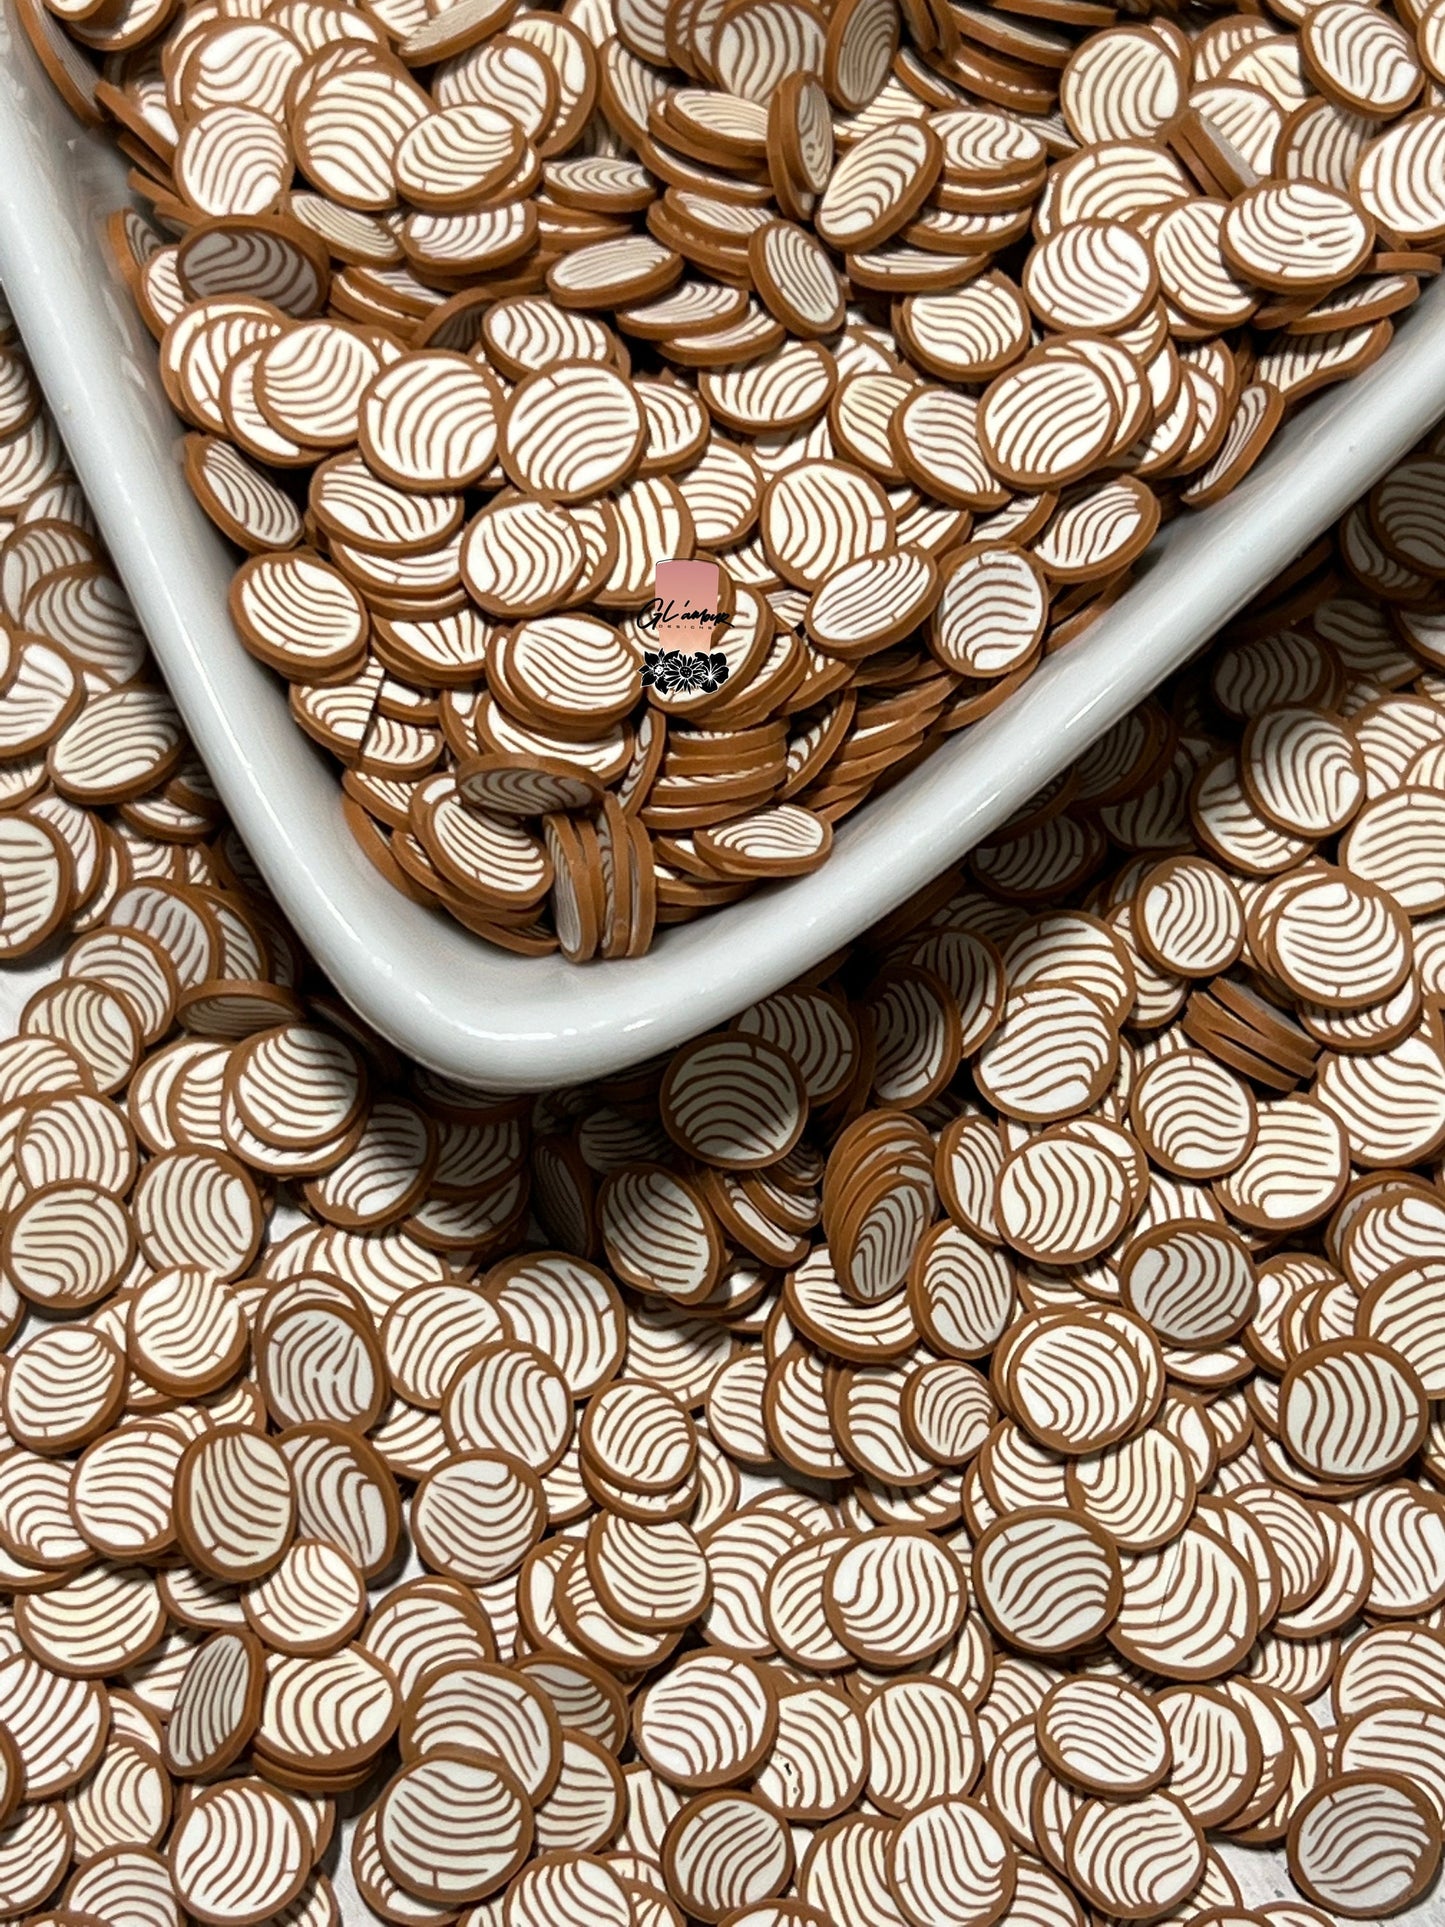 5mm White/Brown Concha Polymer Slices -small